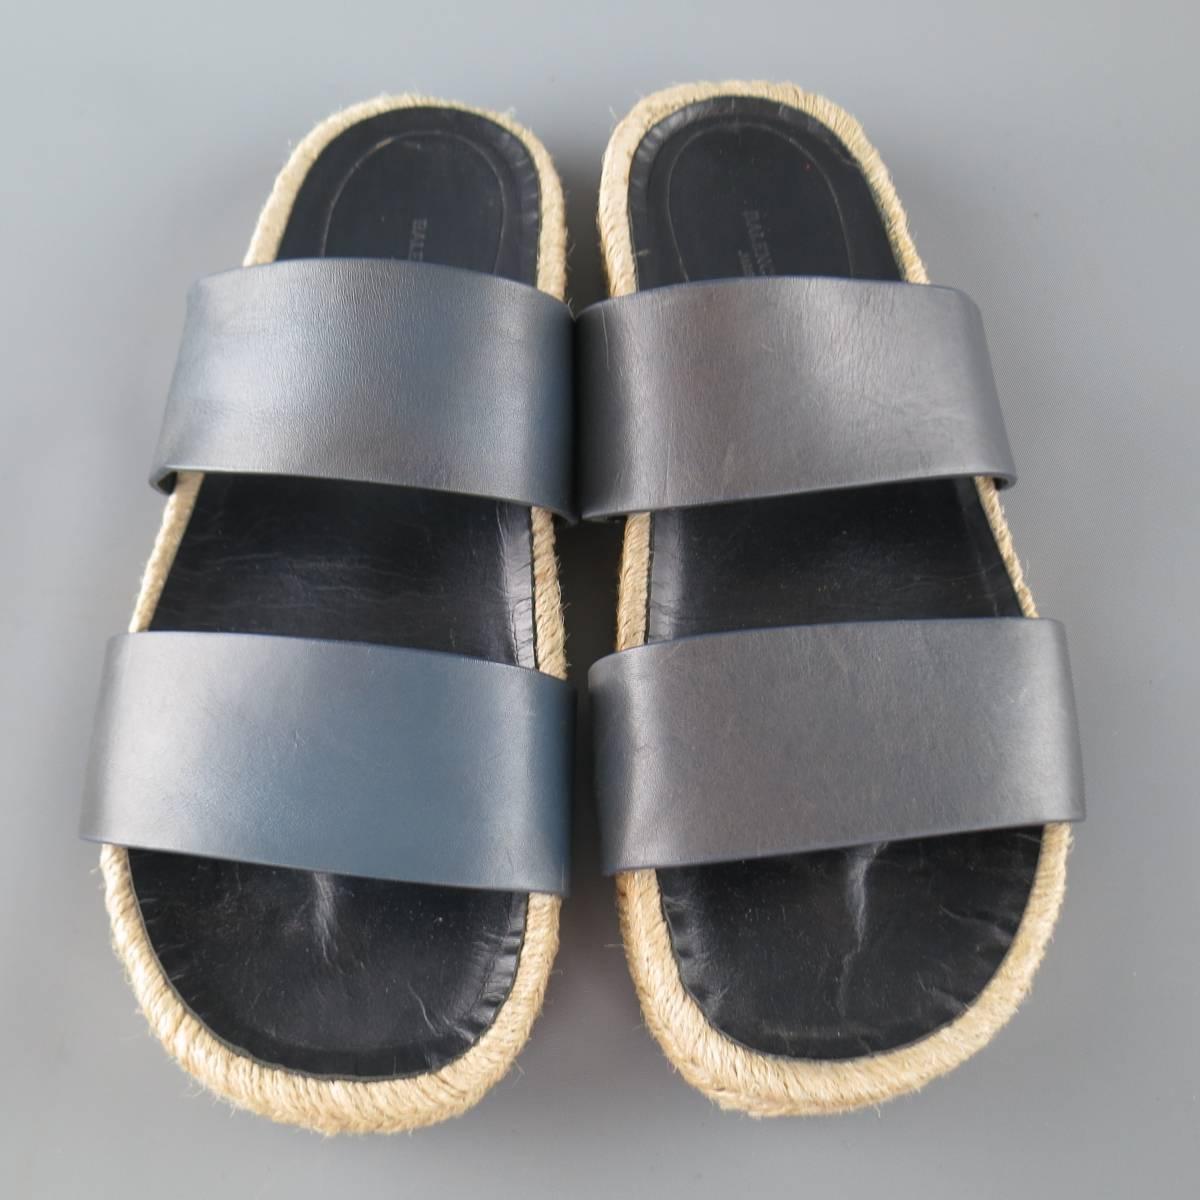 BALENCIAGA slide sandals feature double thick navy leather straps with a woven espadrille sole. Slight color variations throughout leather. Made in Spain.
 
Good Pre-Owned Condition.
Marked: 40


Web ID: 75928 